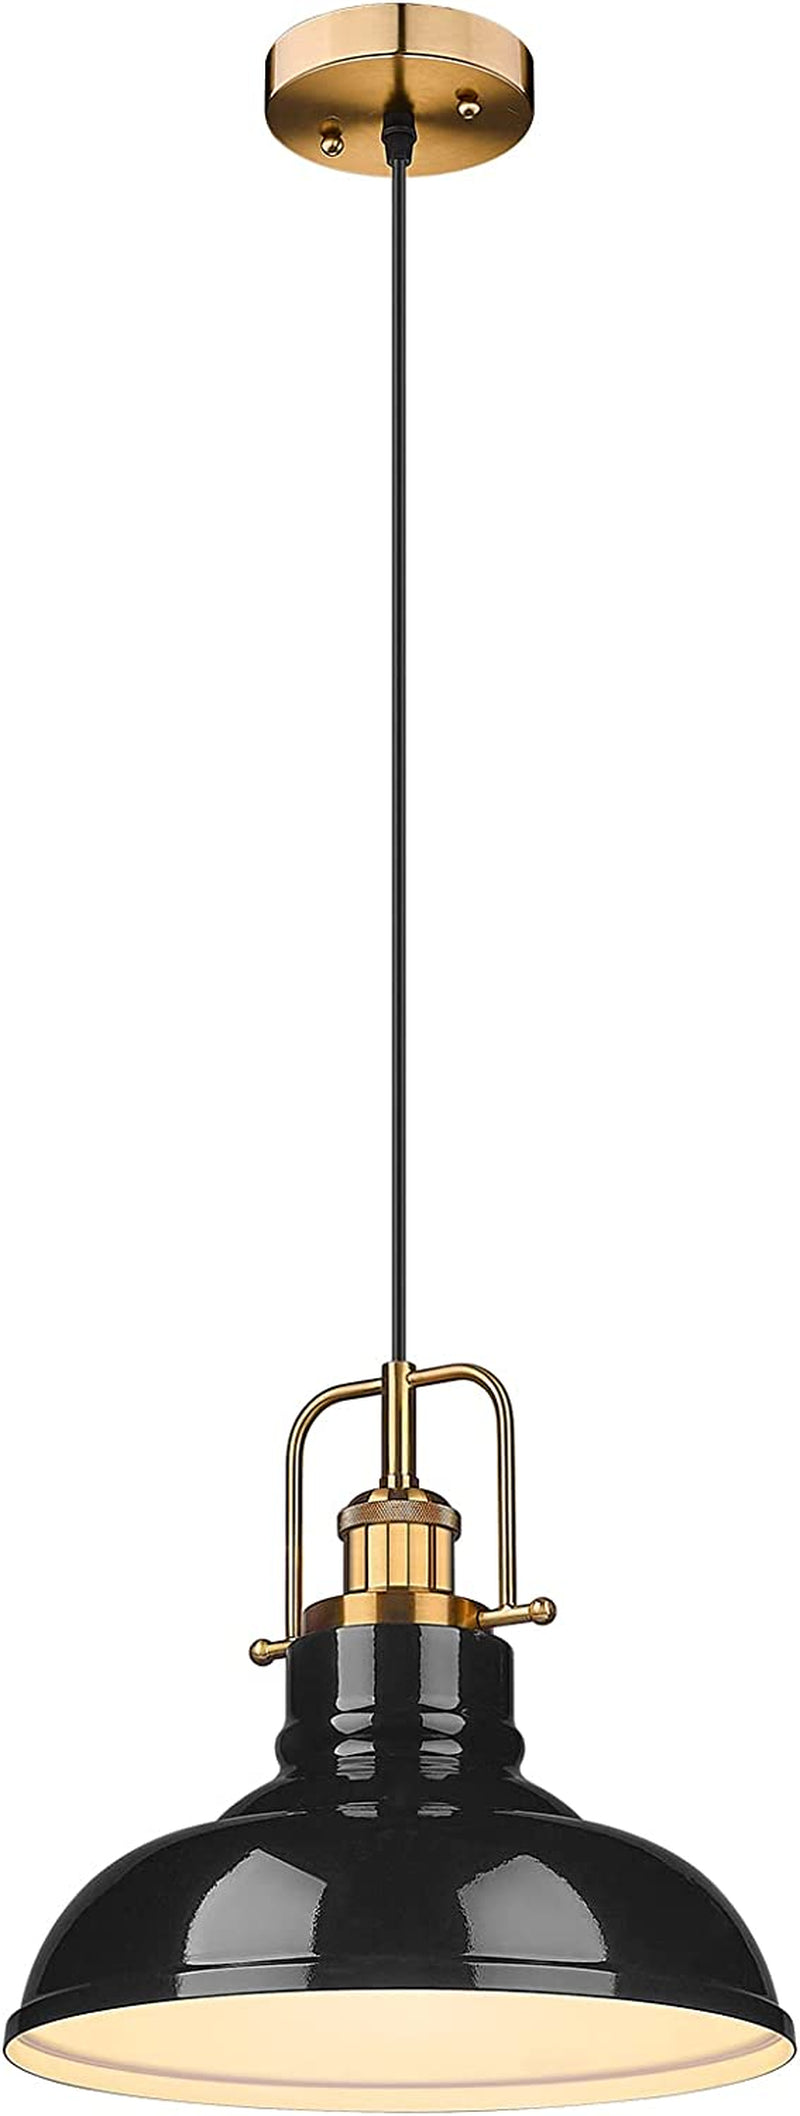 Zeyu 1-Light Industrial Pendant Light, Modern Ceiling Hanging Light Fixture for Kitchen Island Bedroom, Metal Dome Shade, Gray Finish, 016-1 SG Home & Garden > Lighting > Lighting Fixtures zeyu Black and Gold  